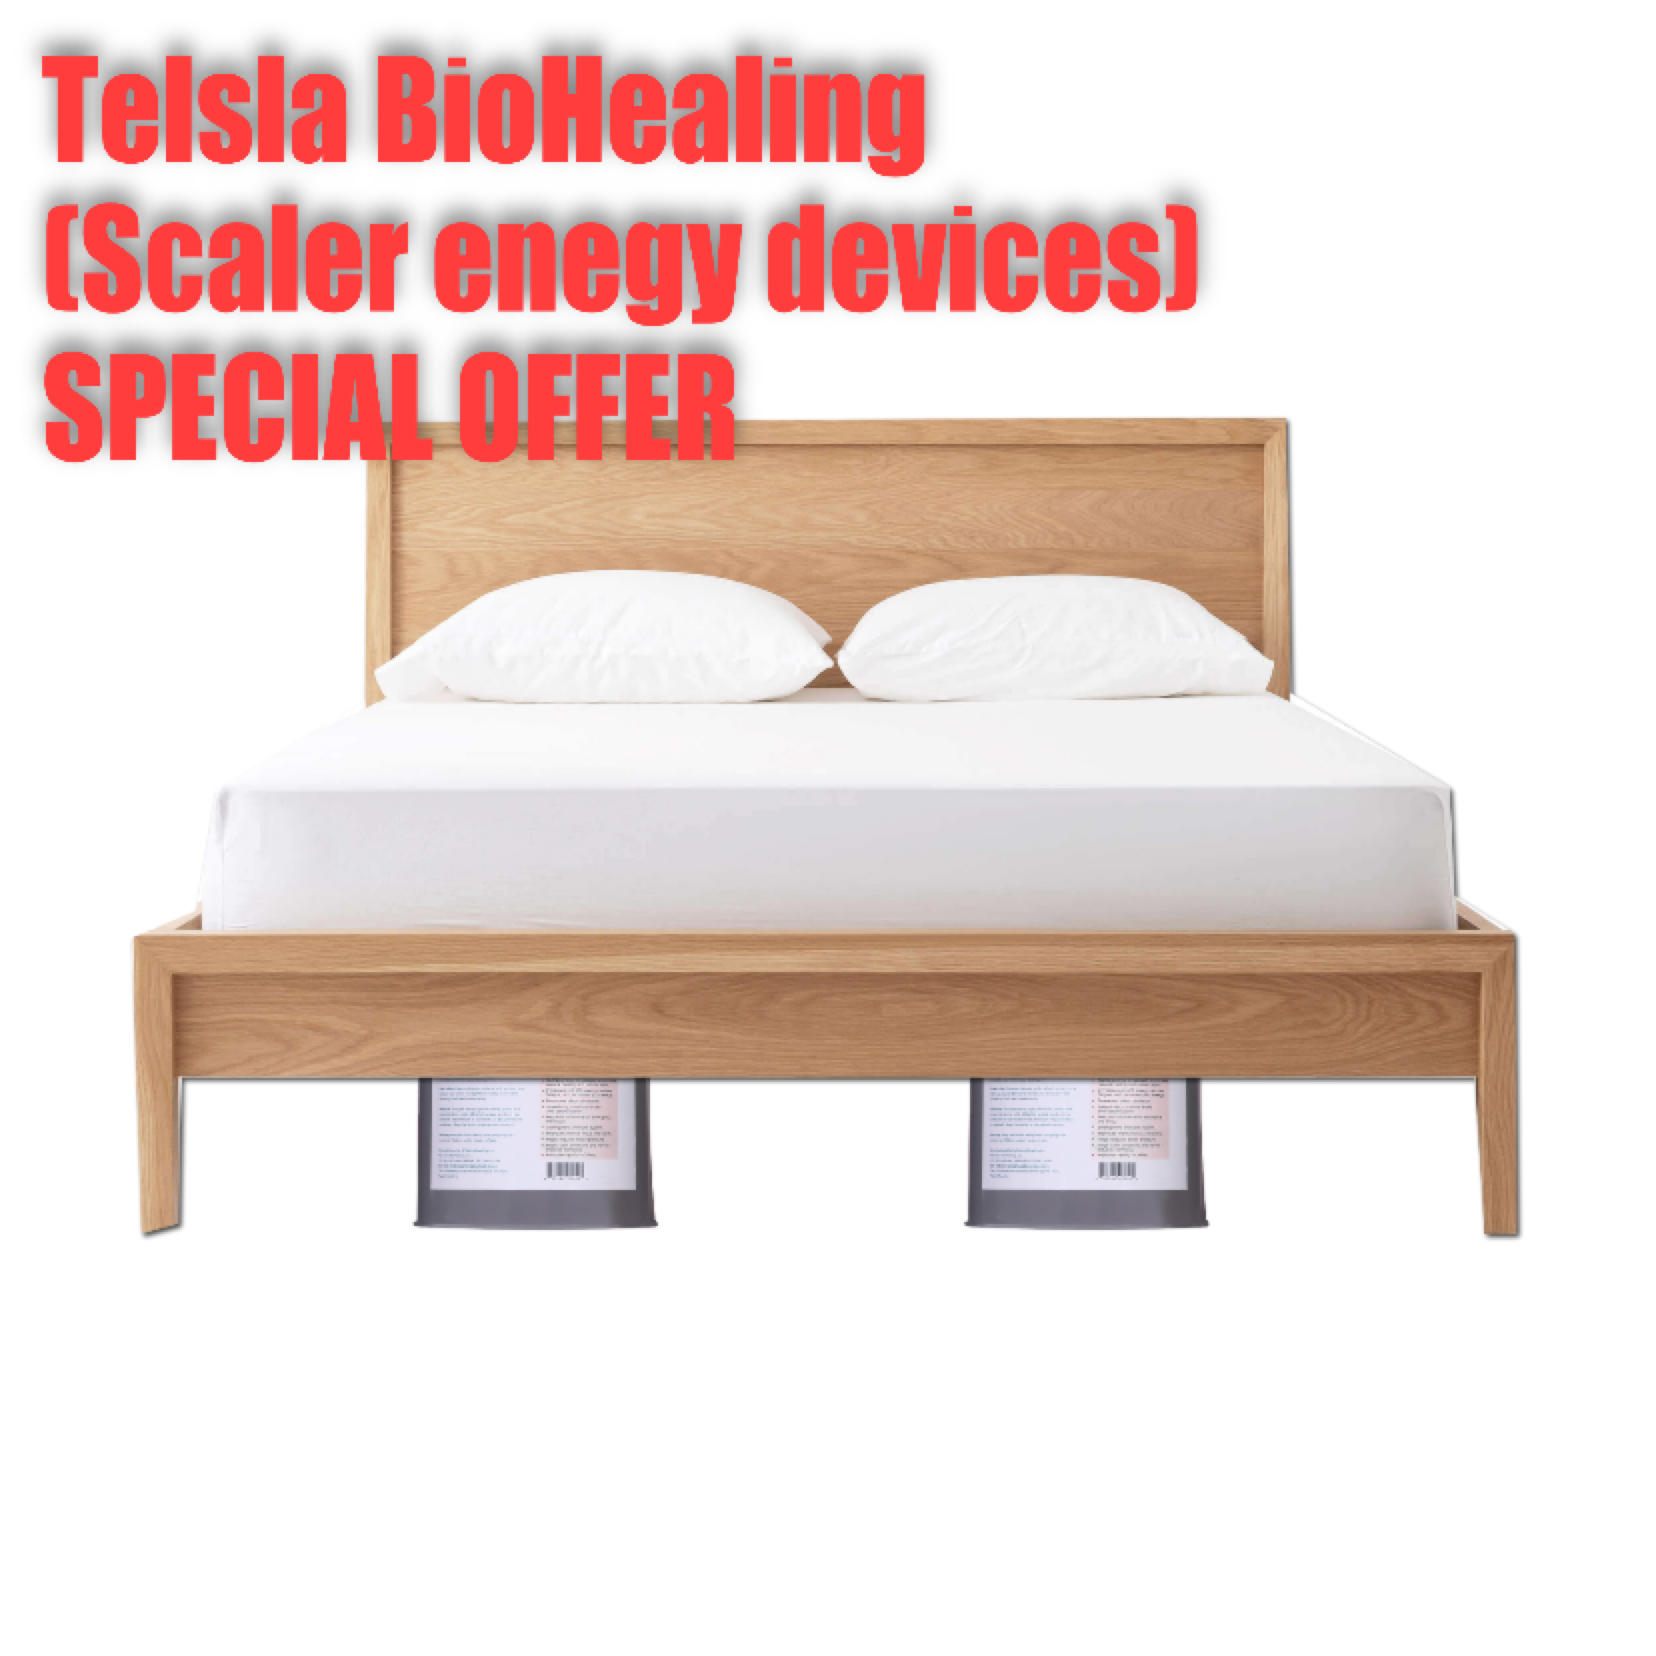 TESLA BioHealing Products Special Discount Offer Greekalicious